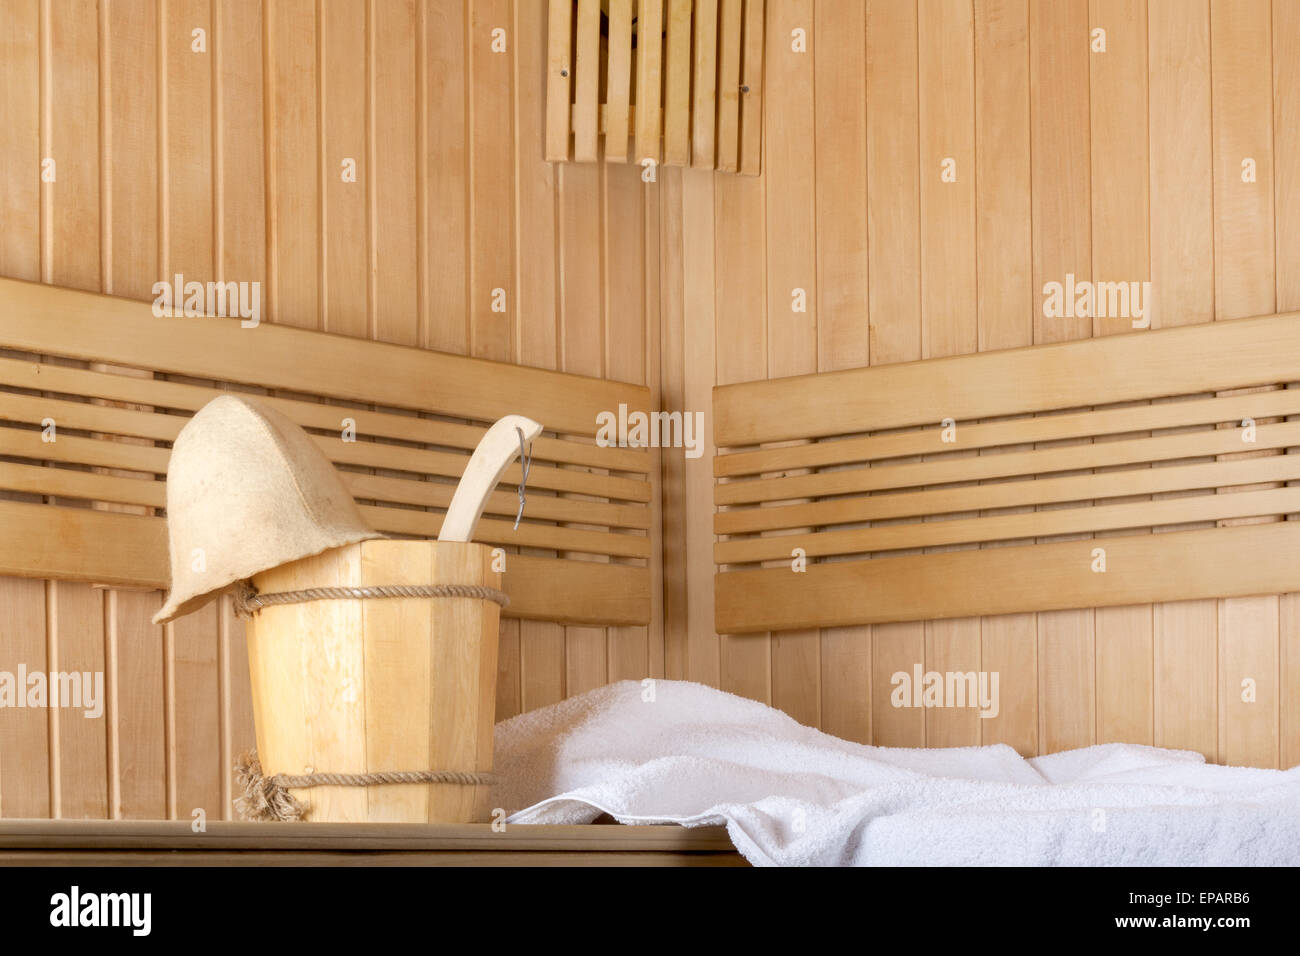 Traditional wooden sauna for relaxation with bucket of water and set of clean towels Stock Photo